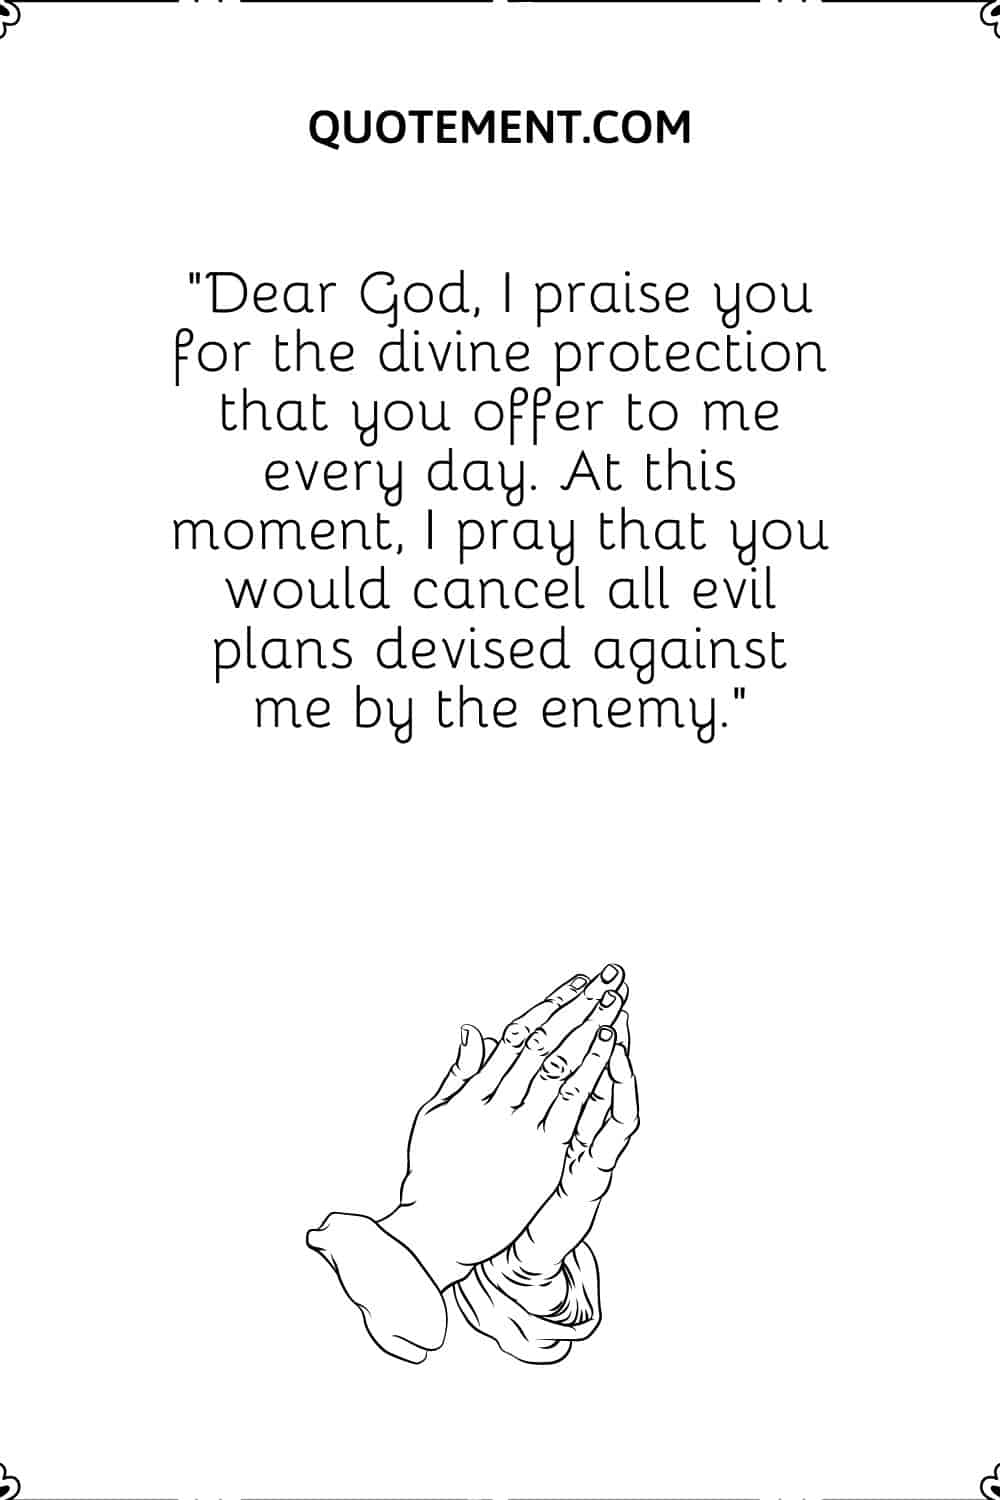 praying hands illustration representing best prayer to cancel evil plan of the enemy 